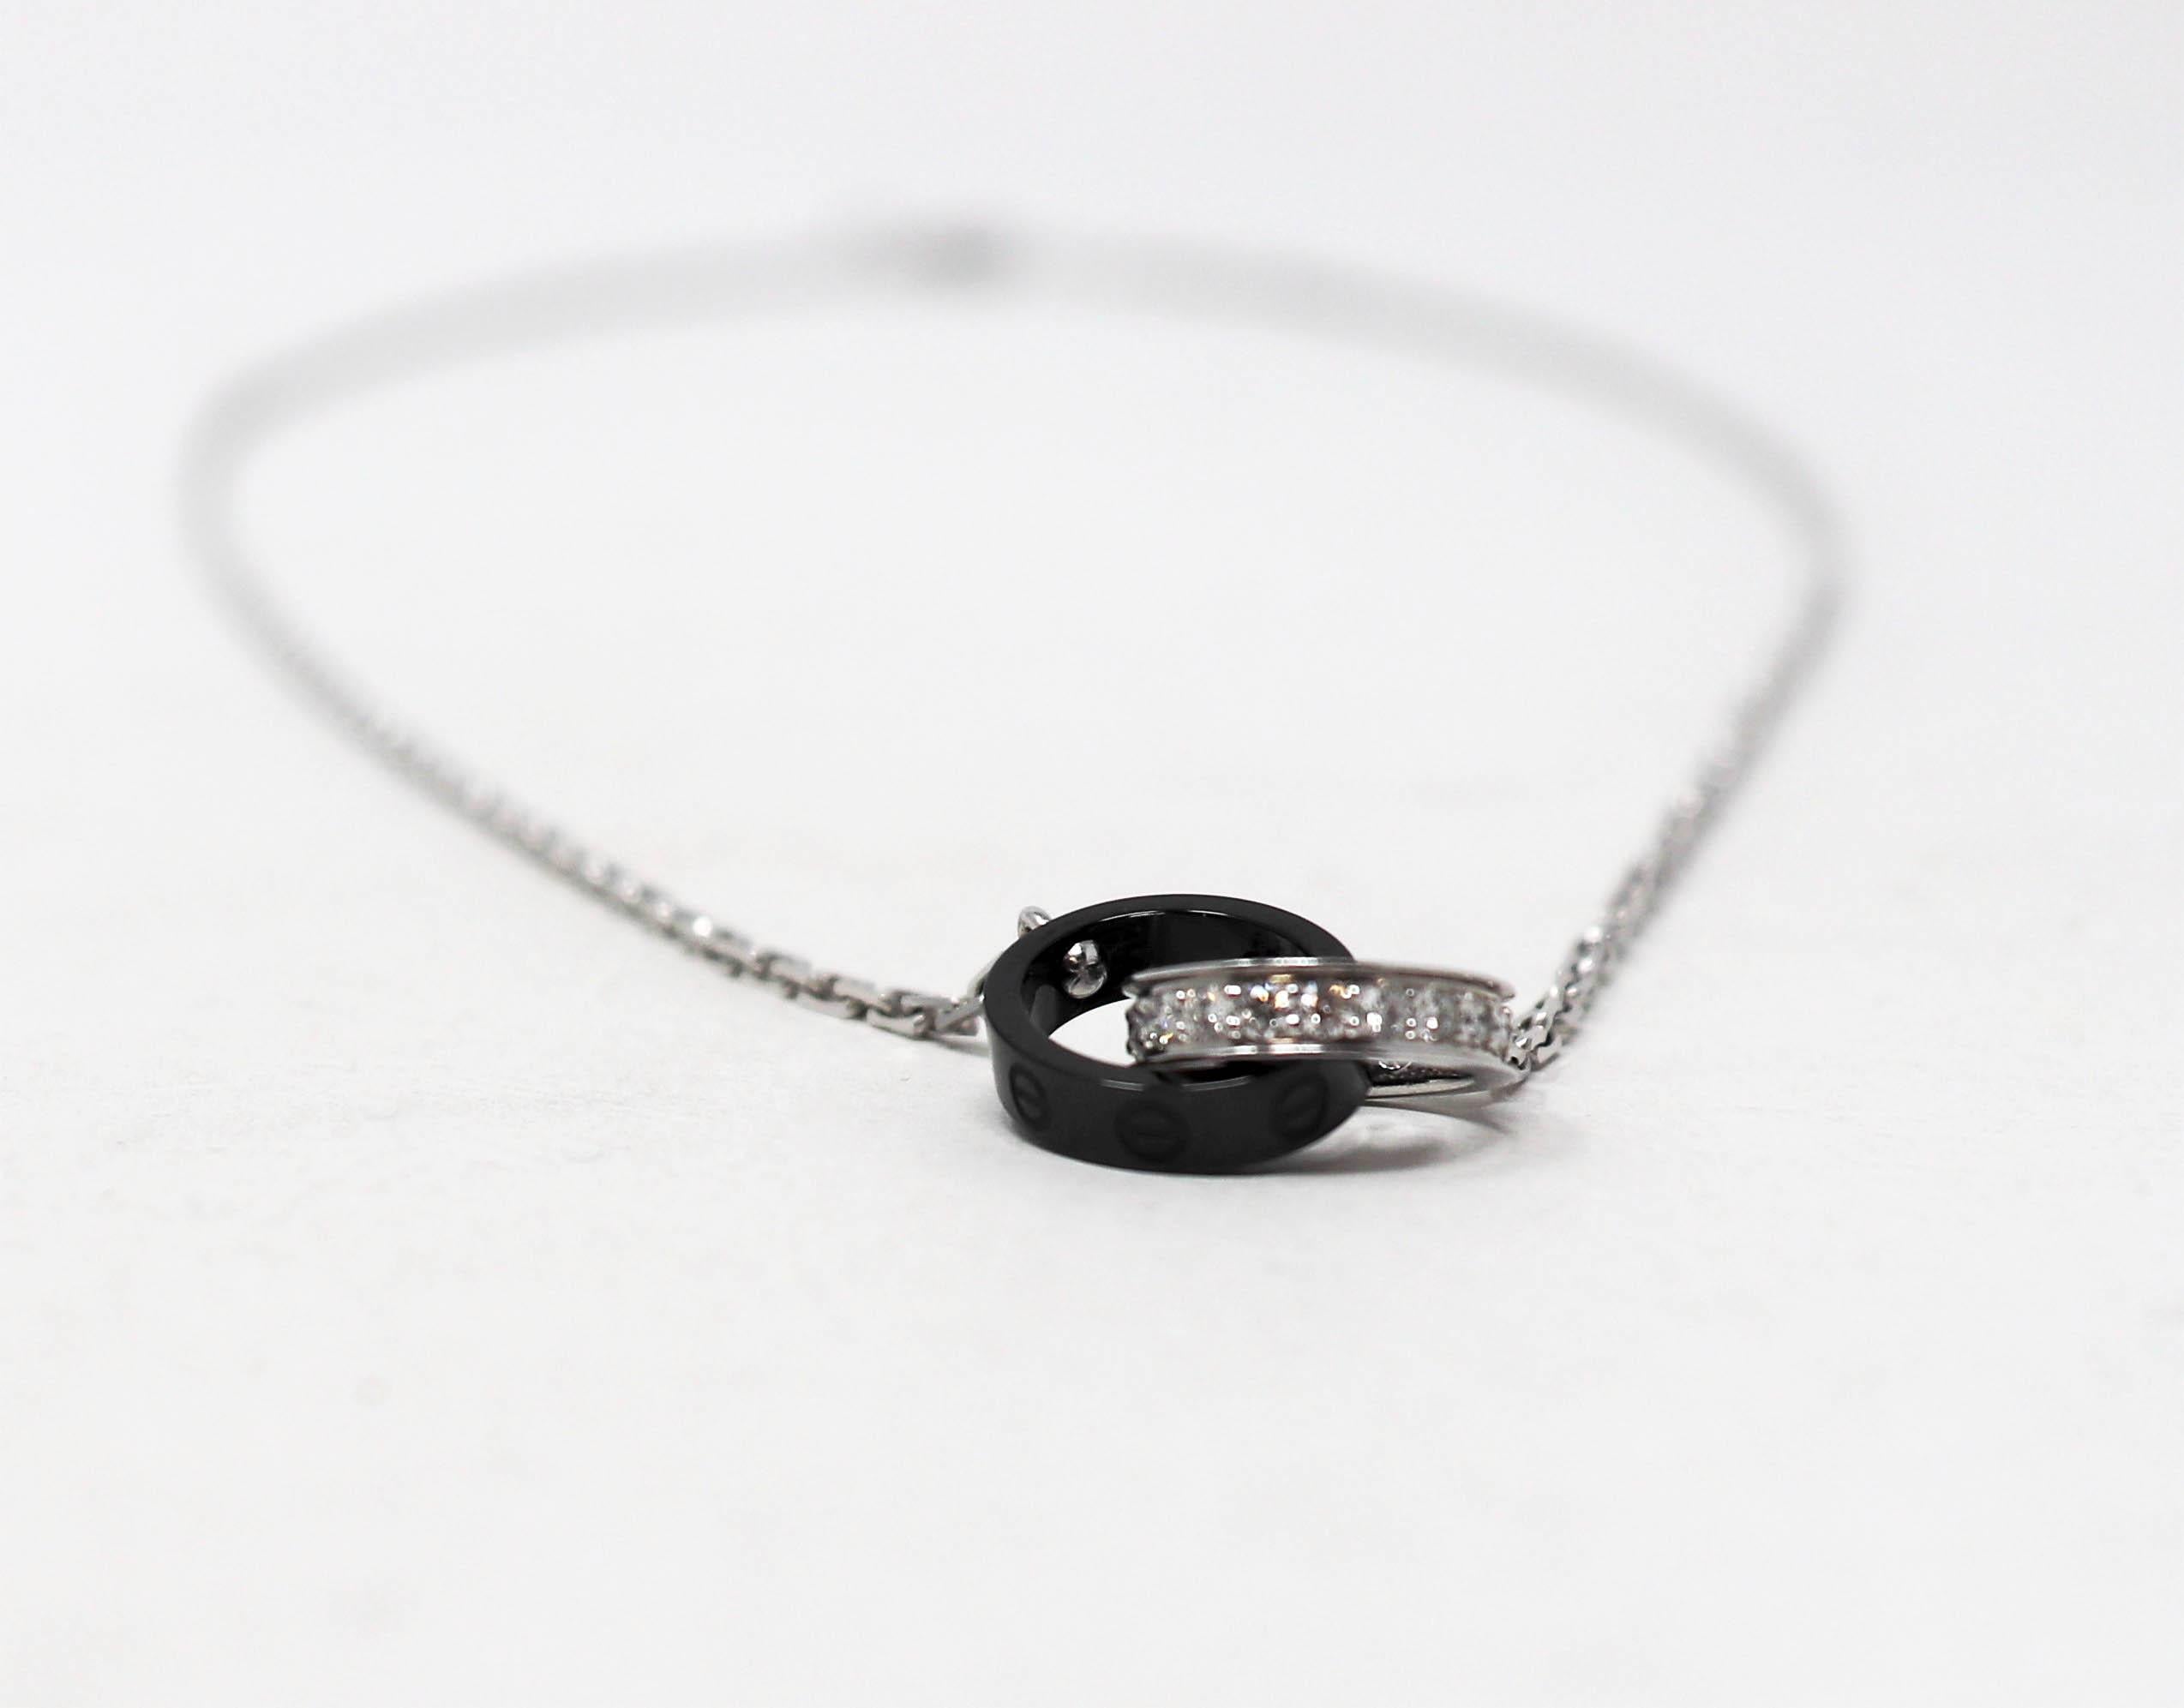 Cartier Pave Diamond and Black Ceramic Baby Love Double Ring Pendant Necklace In Good Condition For Sale In Scottsdale, AZ